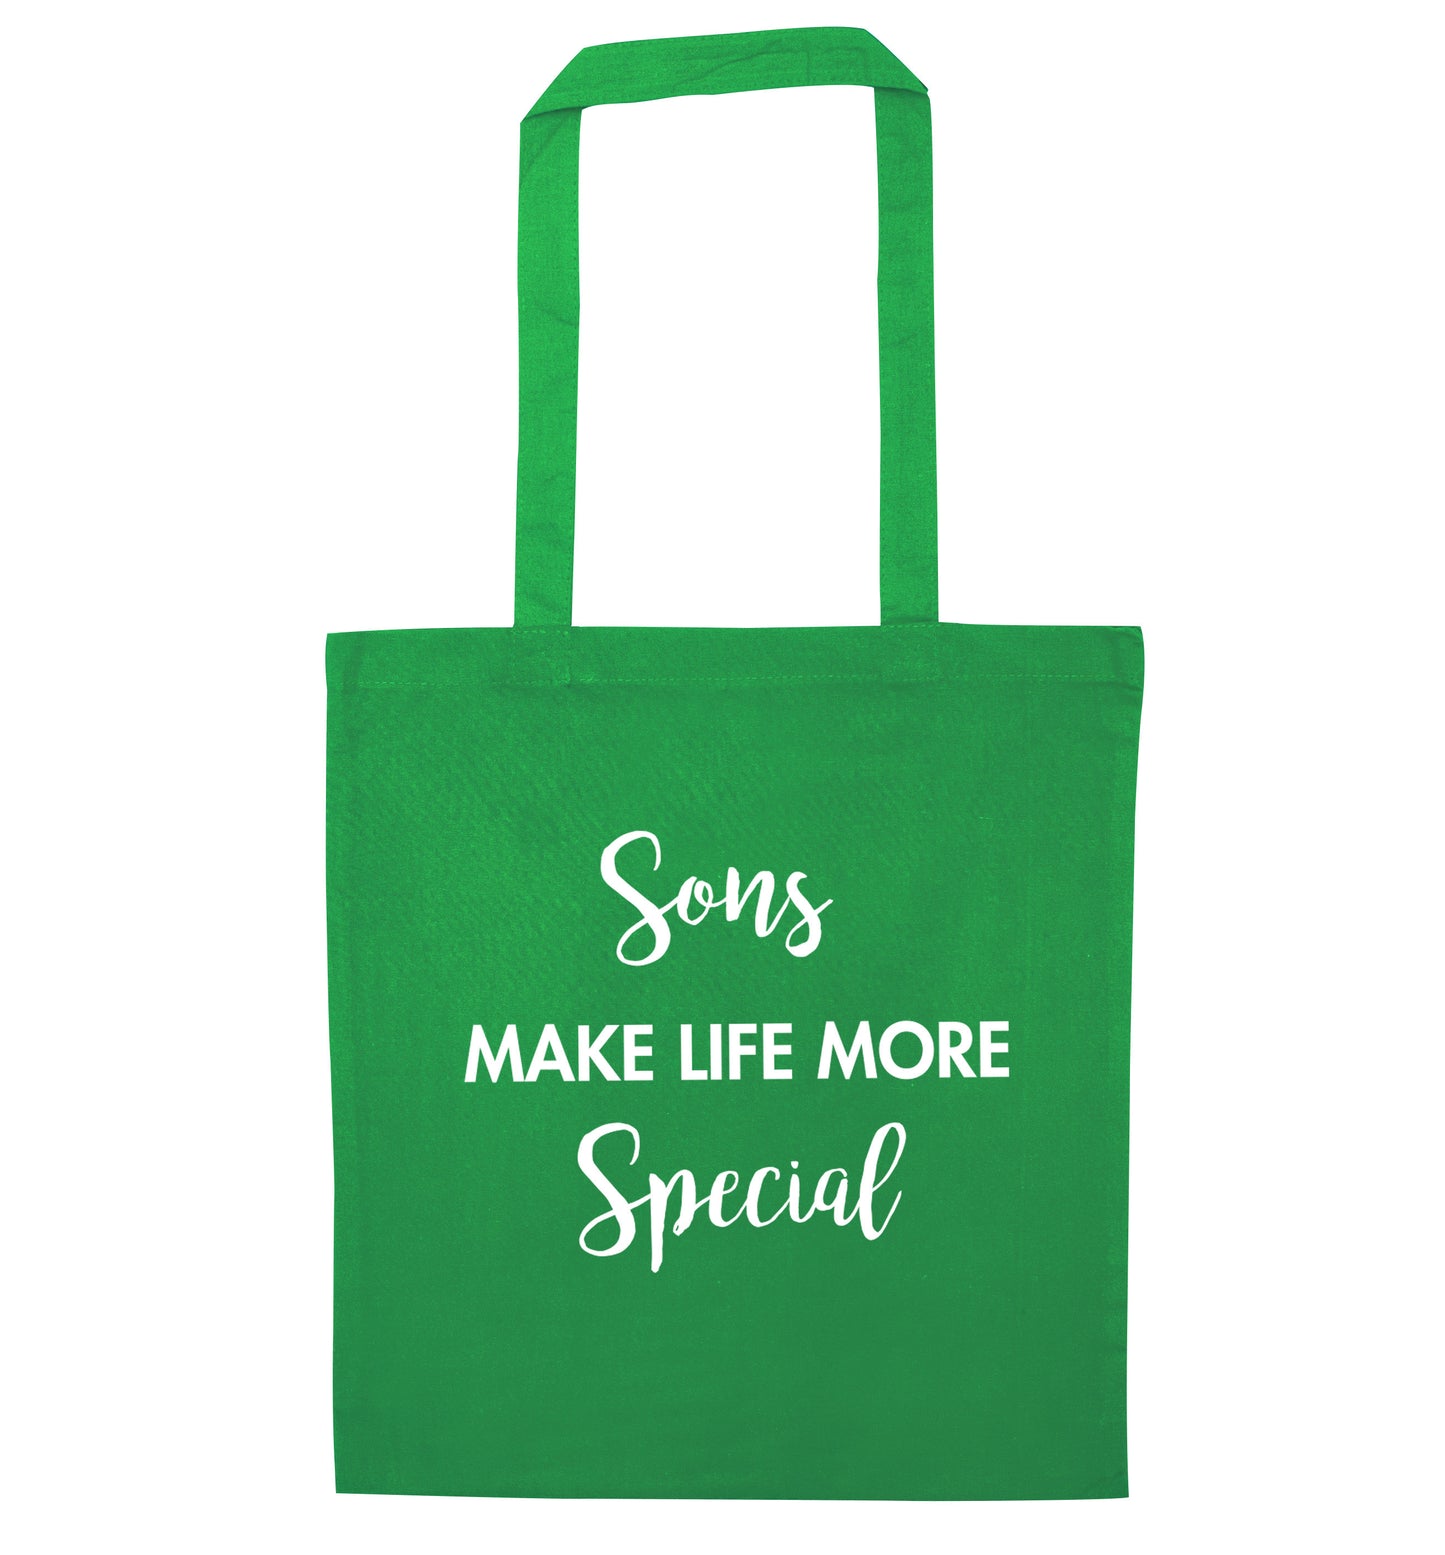 Sons make life more special green tote bag